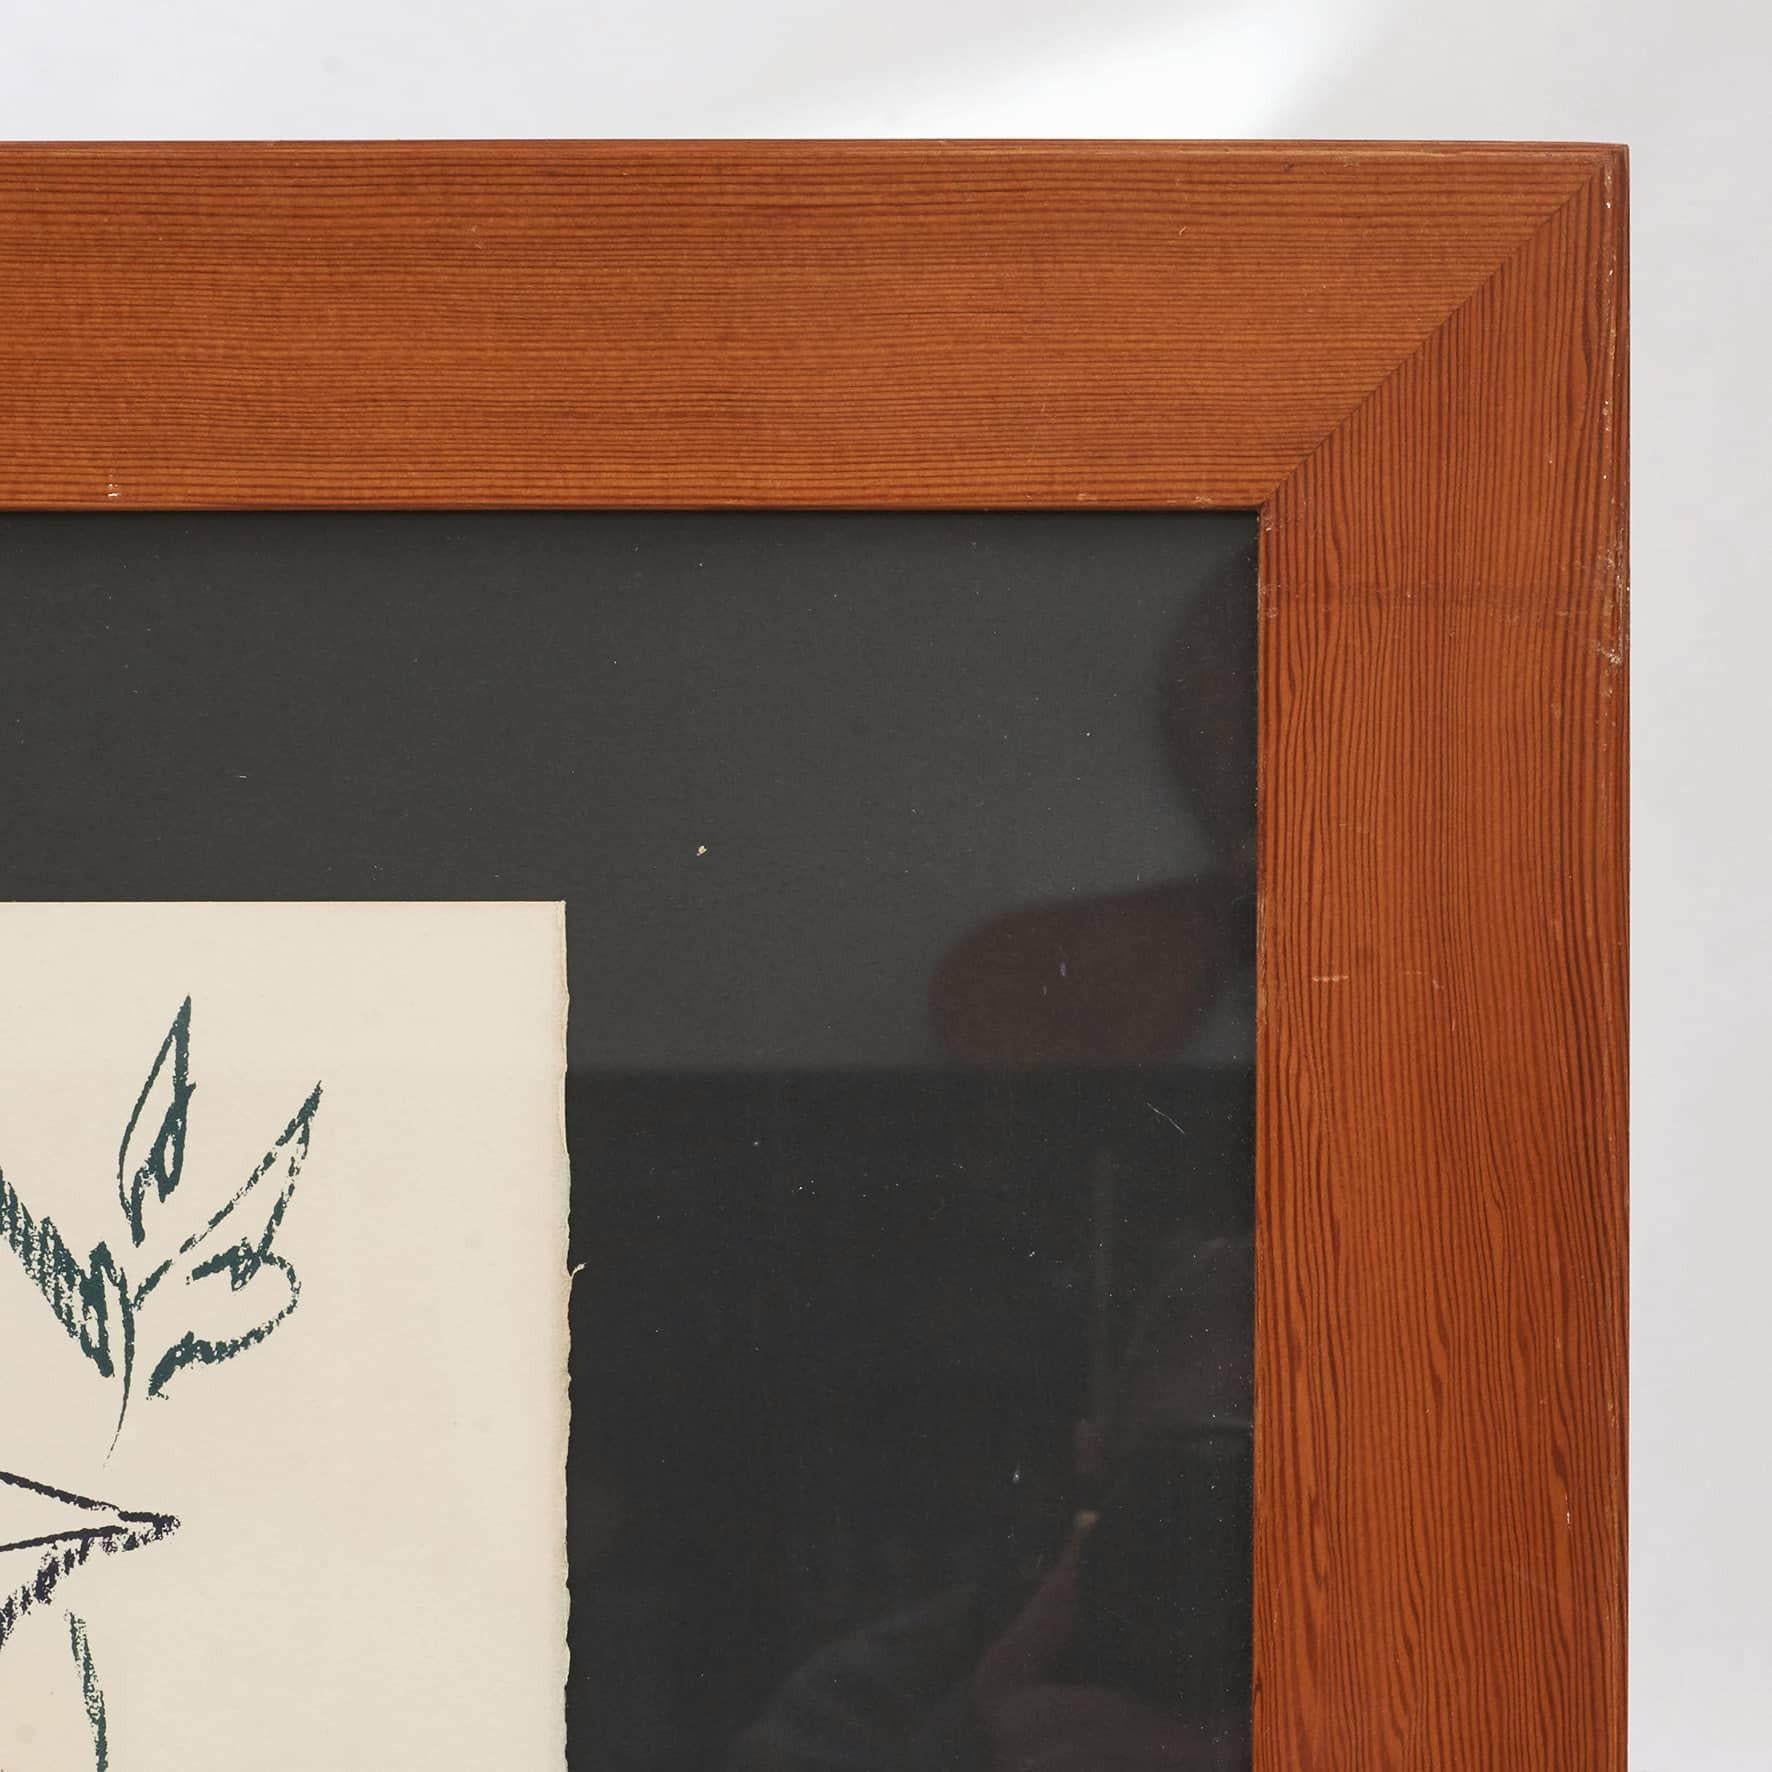 Large Mogens Koch Oregon pine frame made by Rud. Rasmussen Cabinetmakers, c. 1965. Label from here.
Please note: The Picasso lithograph is sold and not included.

 